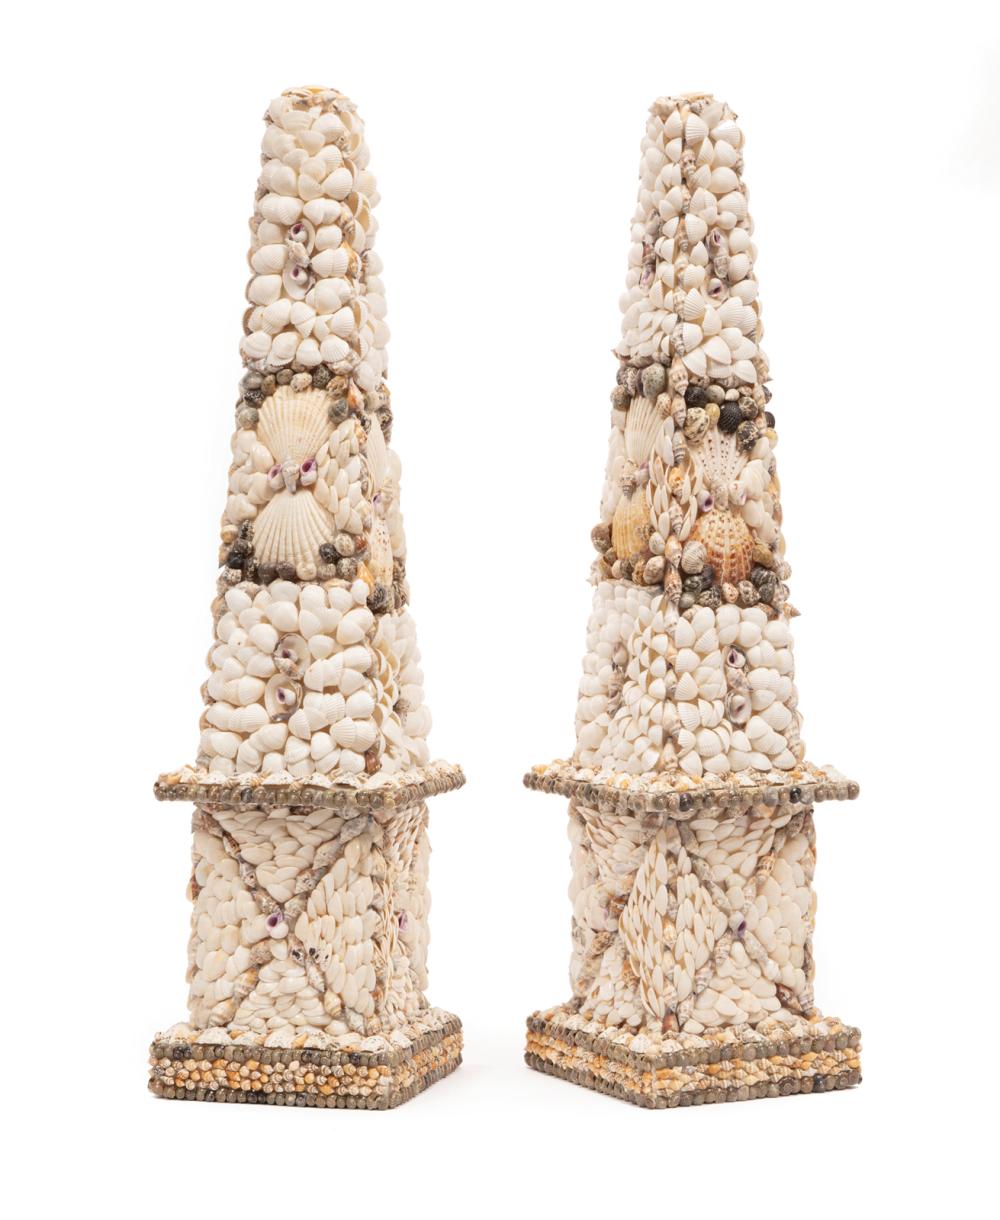 DECORATIVE PAIR OF SHELL ENCRUSTED